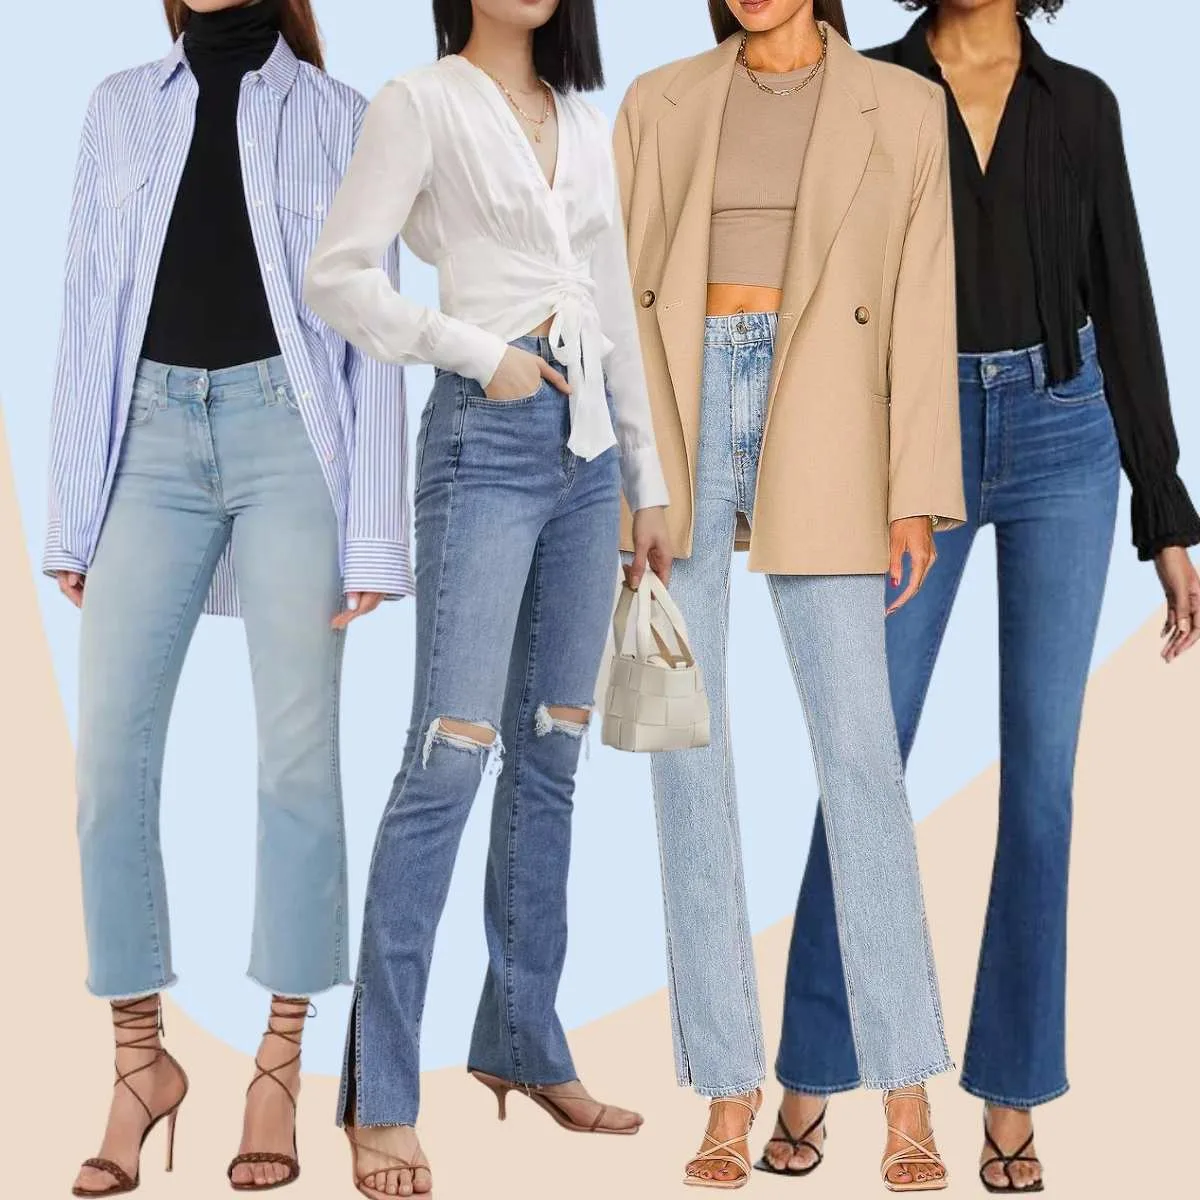 Collage of 4 women wearing strappy sandals with bootcut jeans outfits.